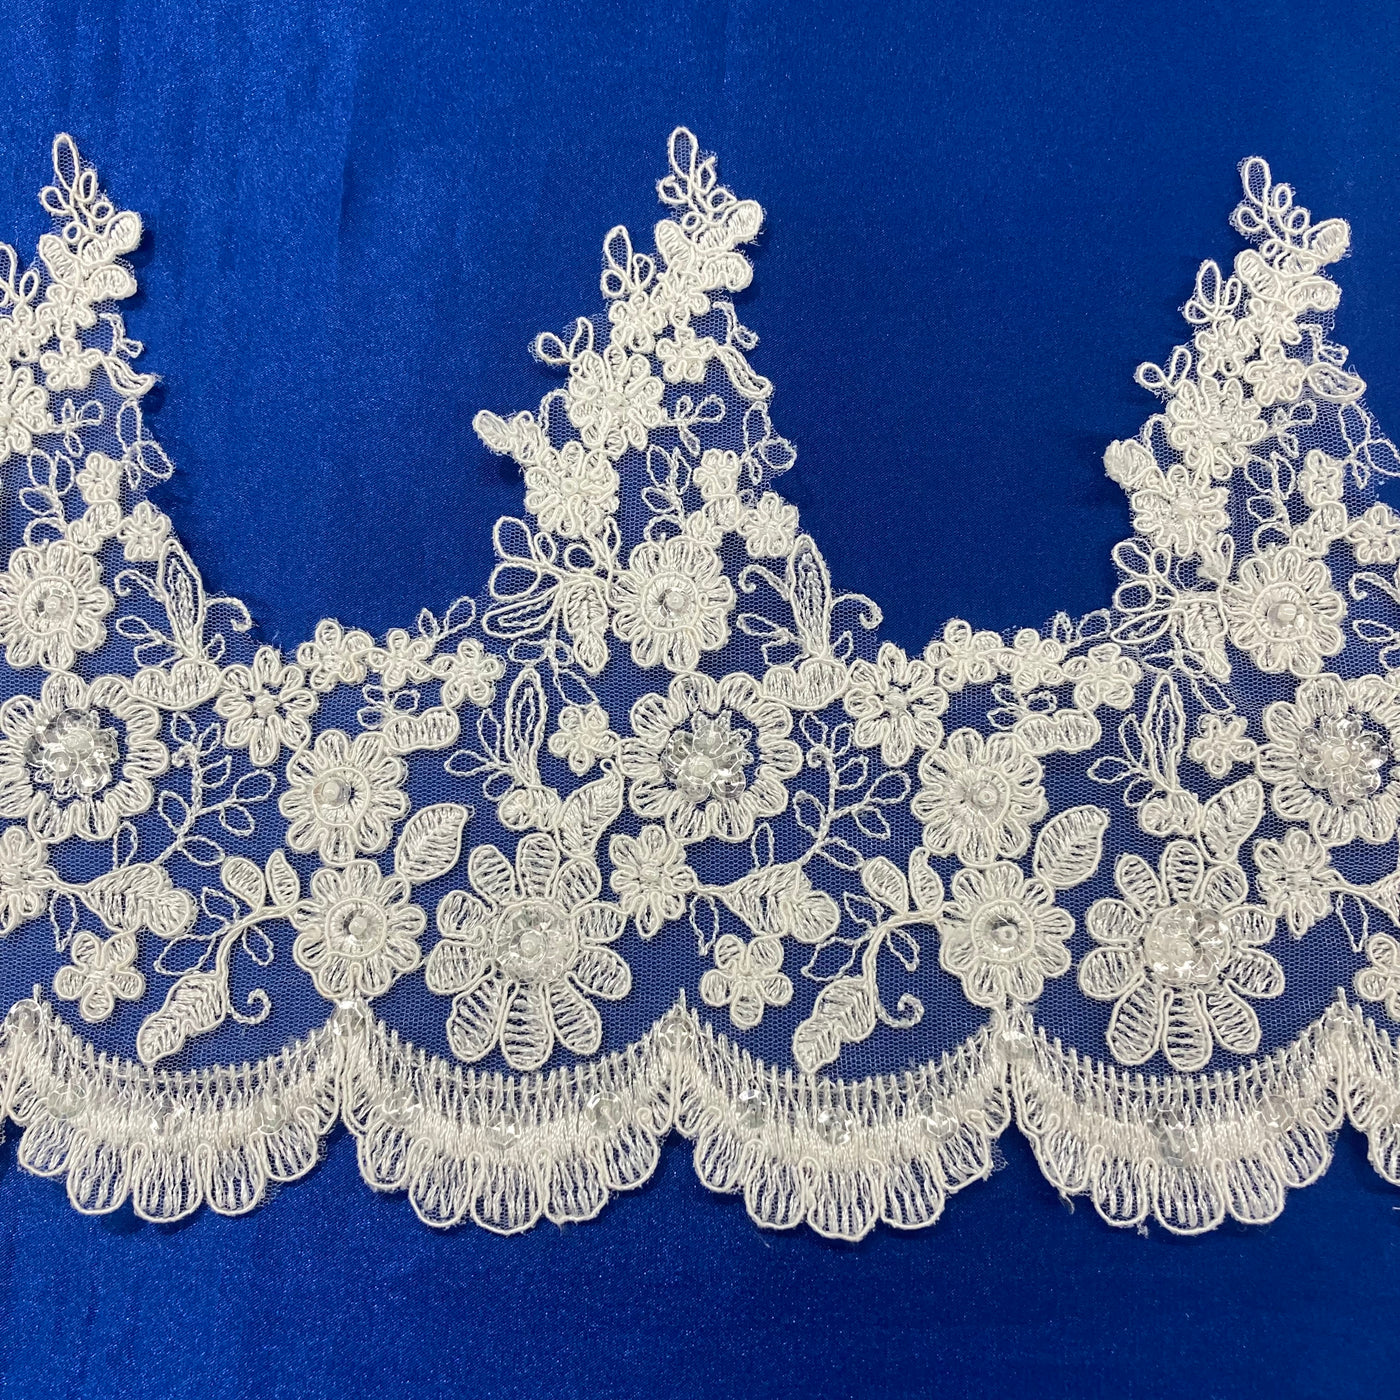 Corded & Beaded Ivory Trimming Lace, Embroidered on 100% Polyester Net Mesh. Lace Usa